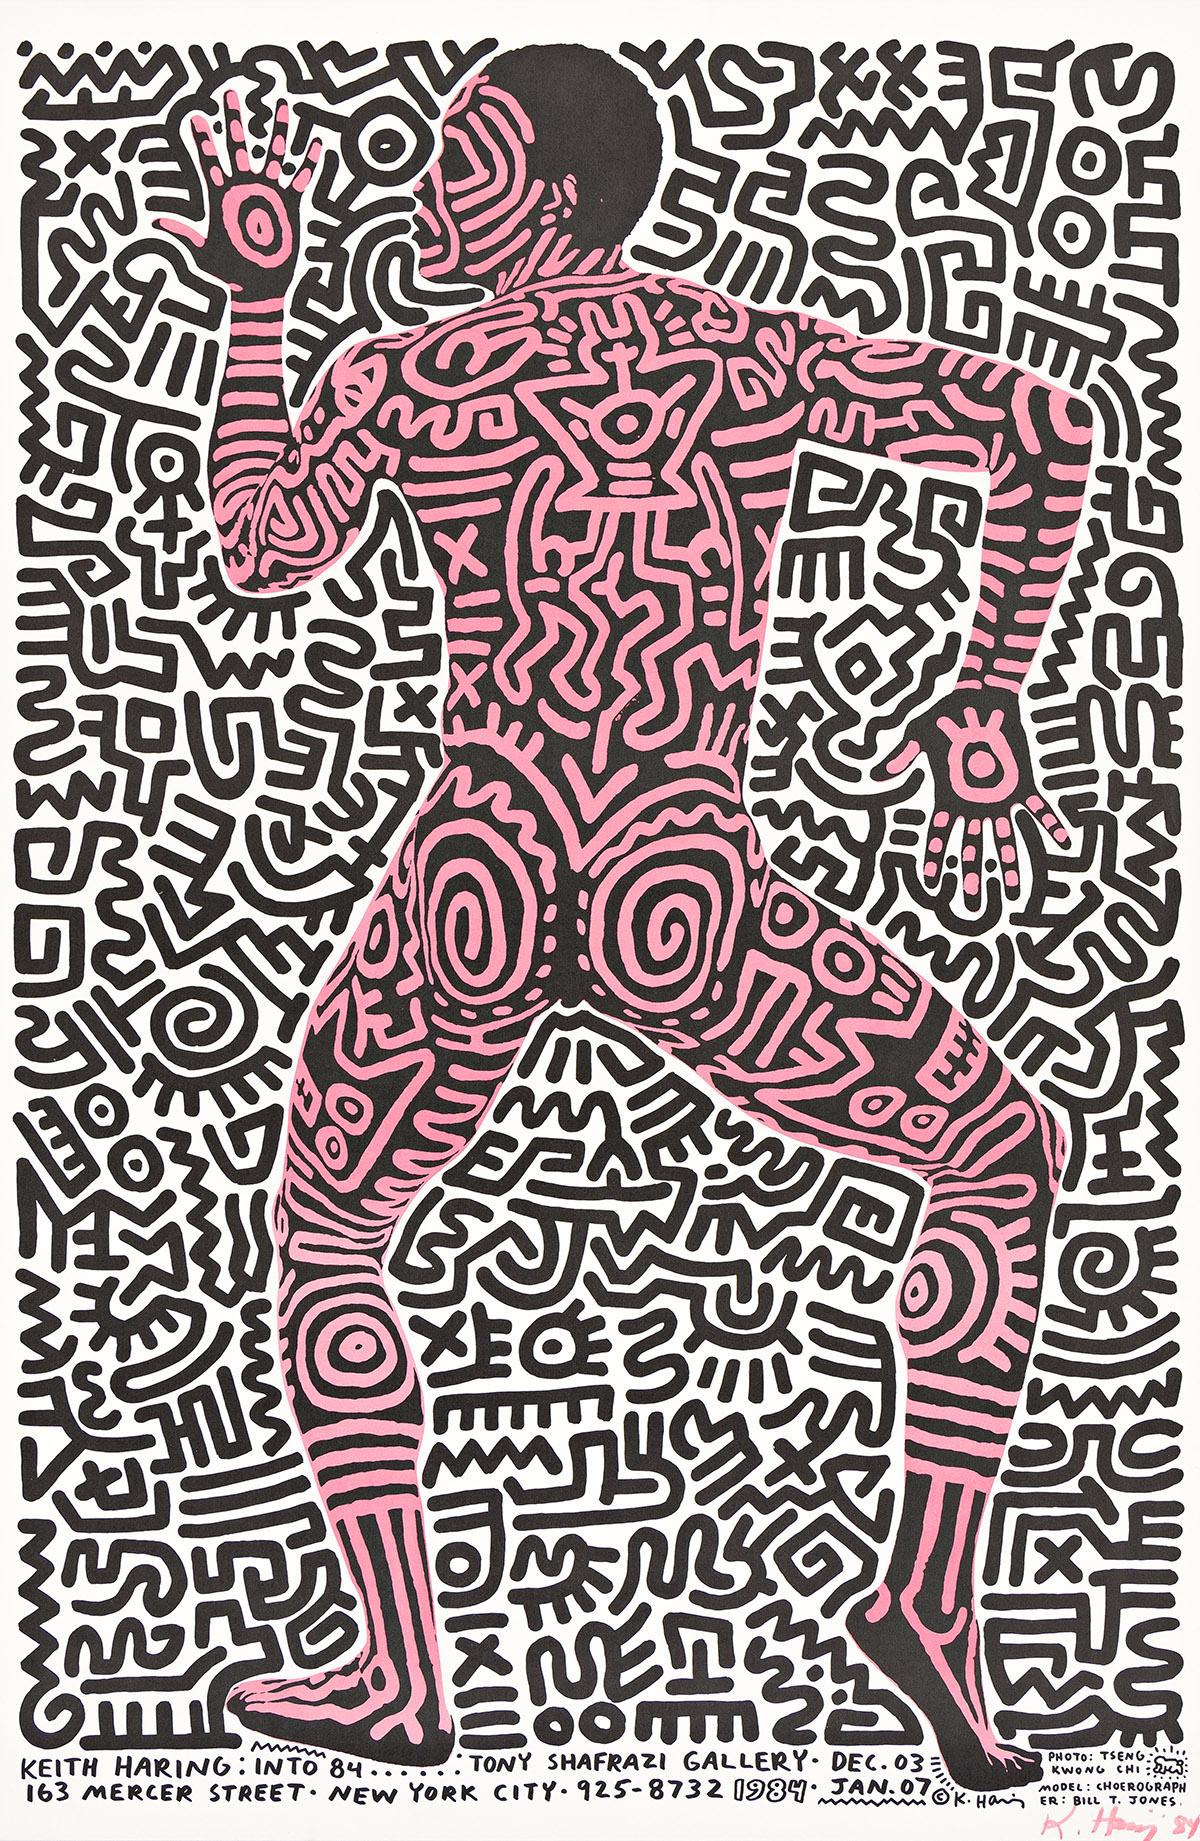 Color offset lithograph. Signed and dated in felt-tip pen and pink ink, lower right. Published by Tony Shafrazi Gallery, New York. 